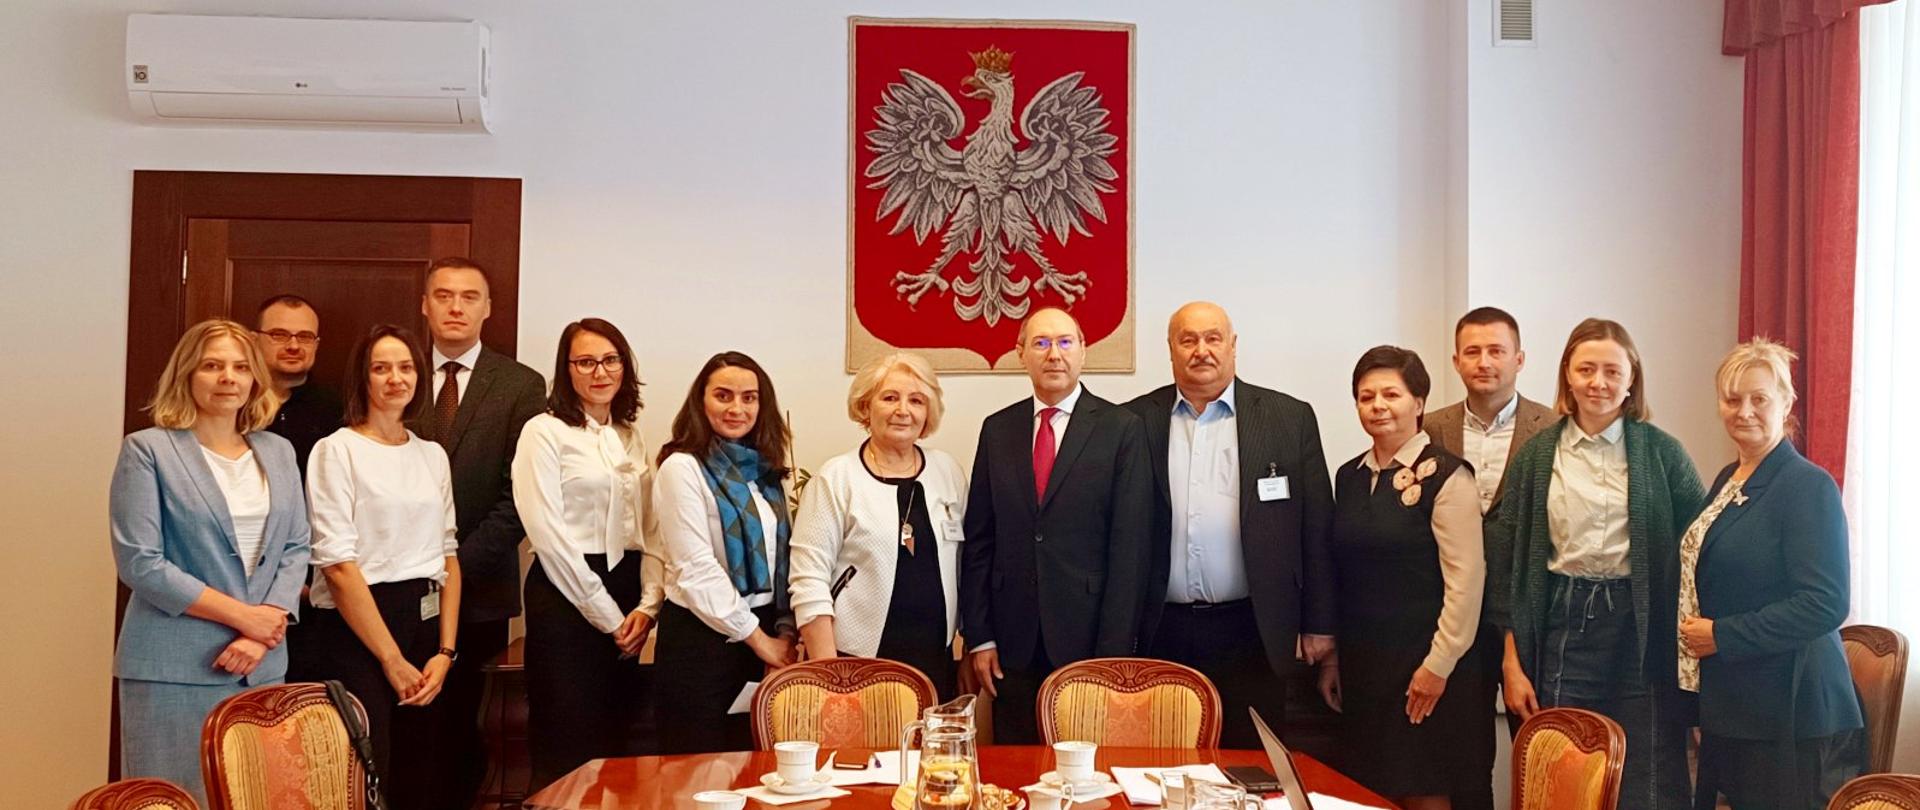 Representative of the Moldavian Embassy in Poland Gheorghe Soltan, representative of the Ministry of Foreign Affairs - Wojciech Gołębiowski with representatives of GUGiK and a delegation from Moldova.